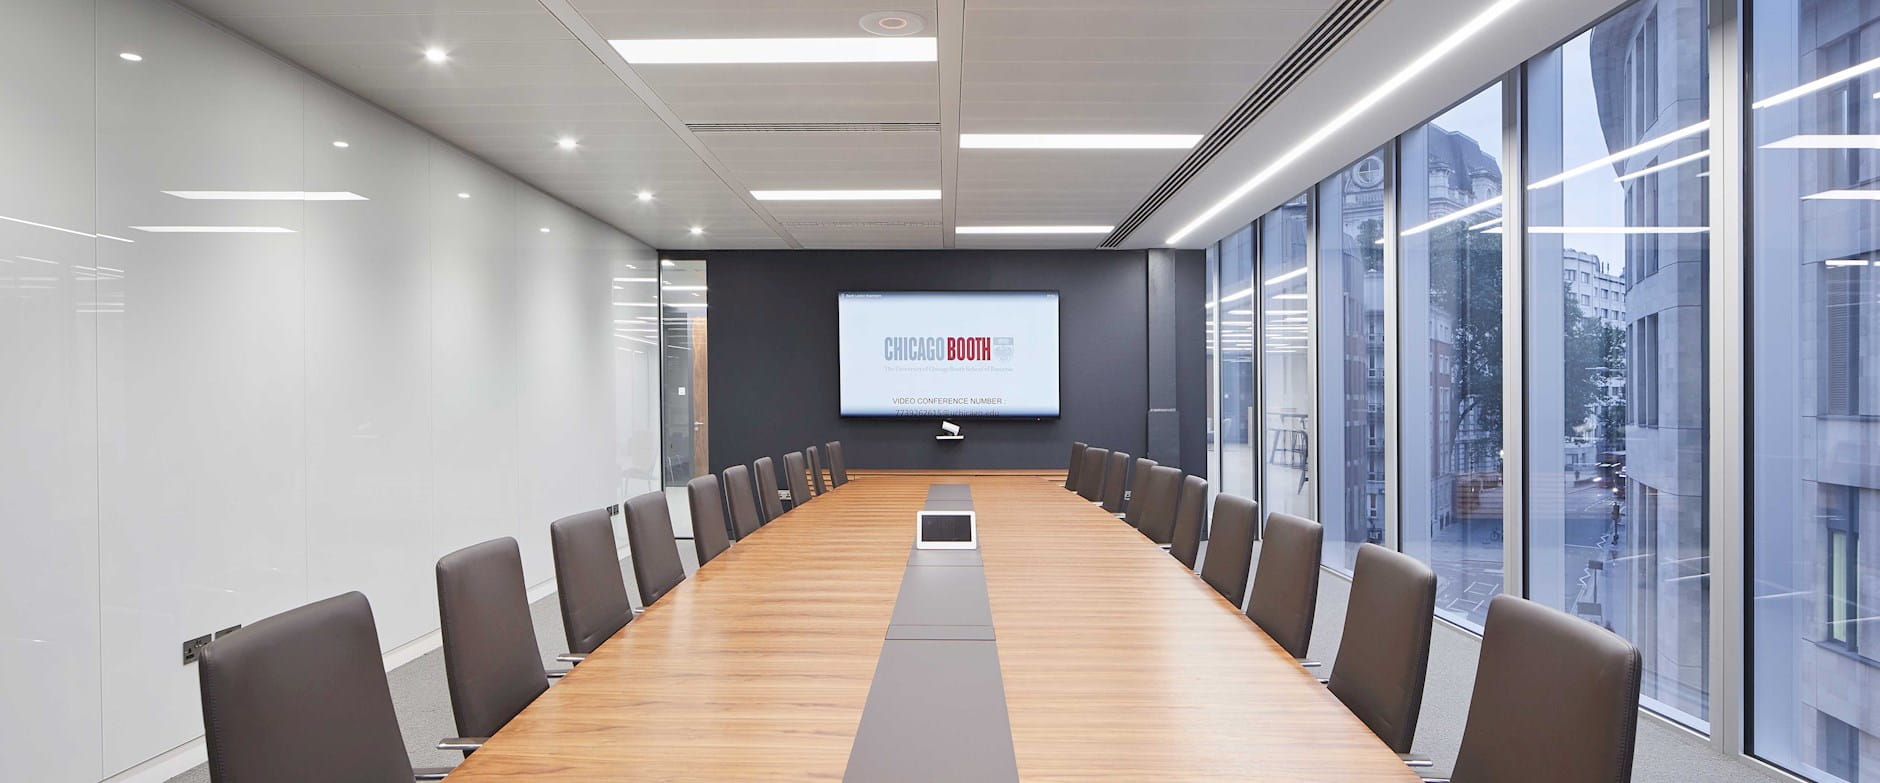 Boardroom table with screen on the wall